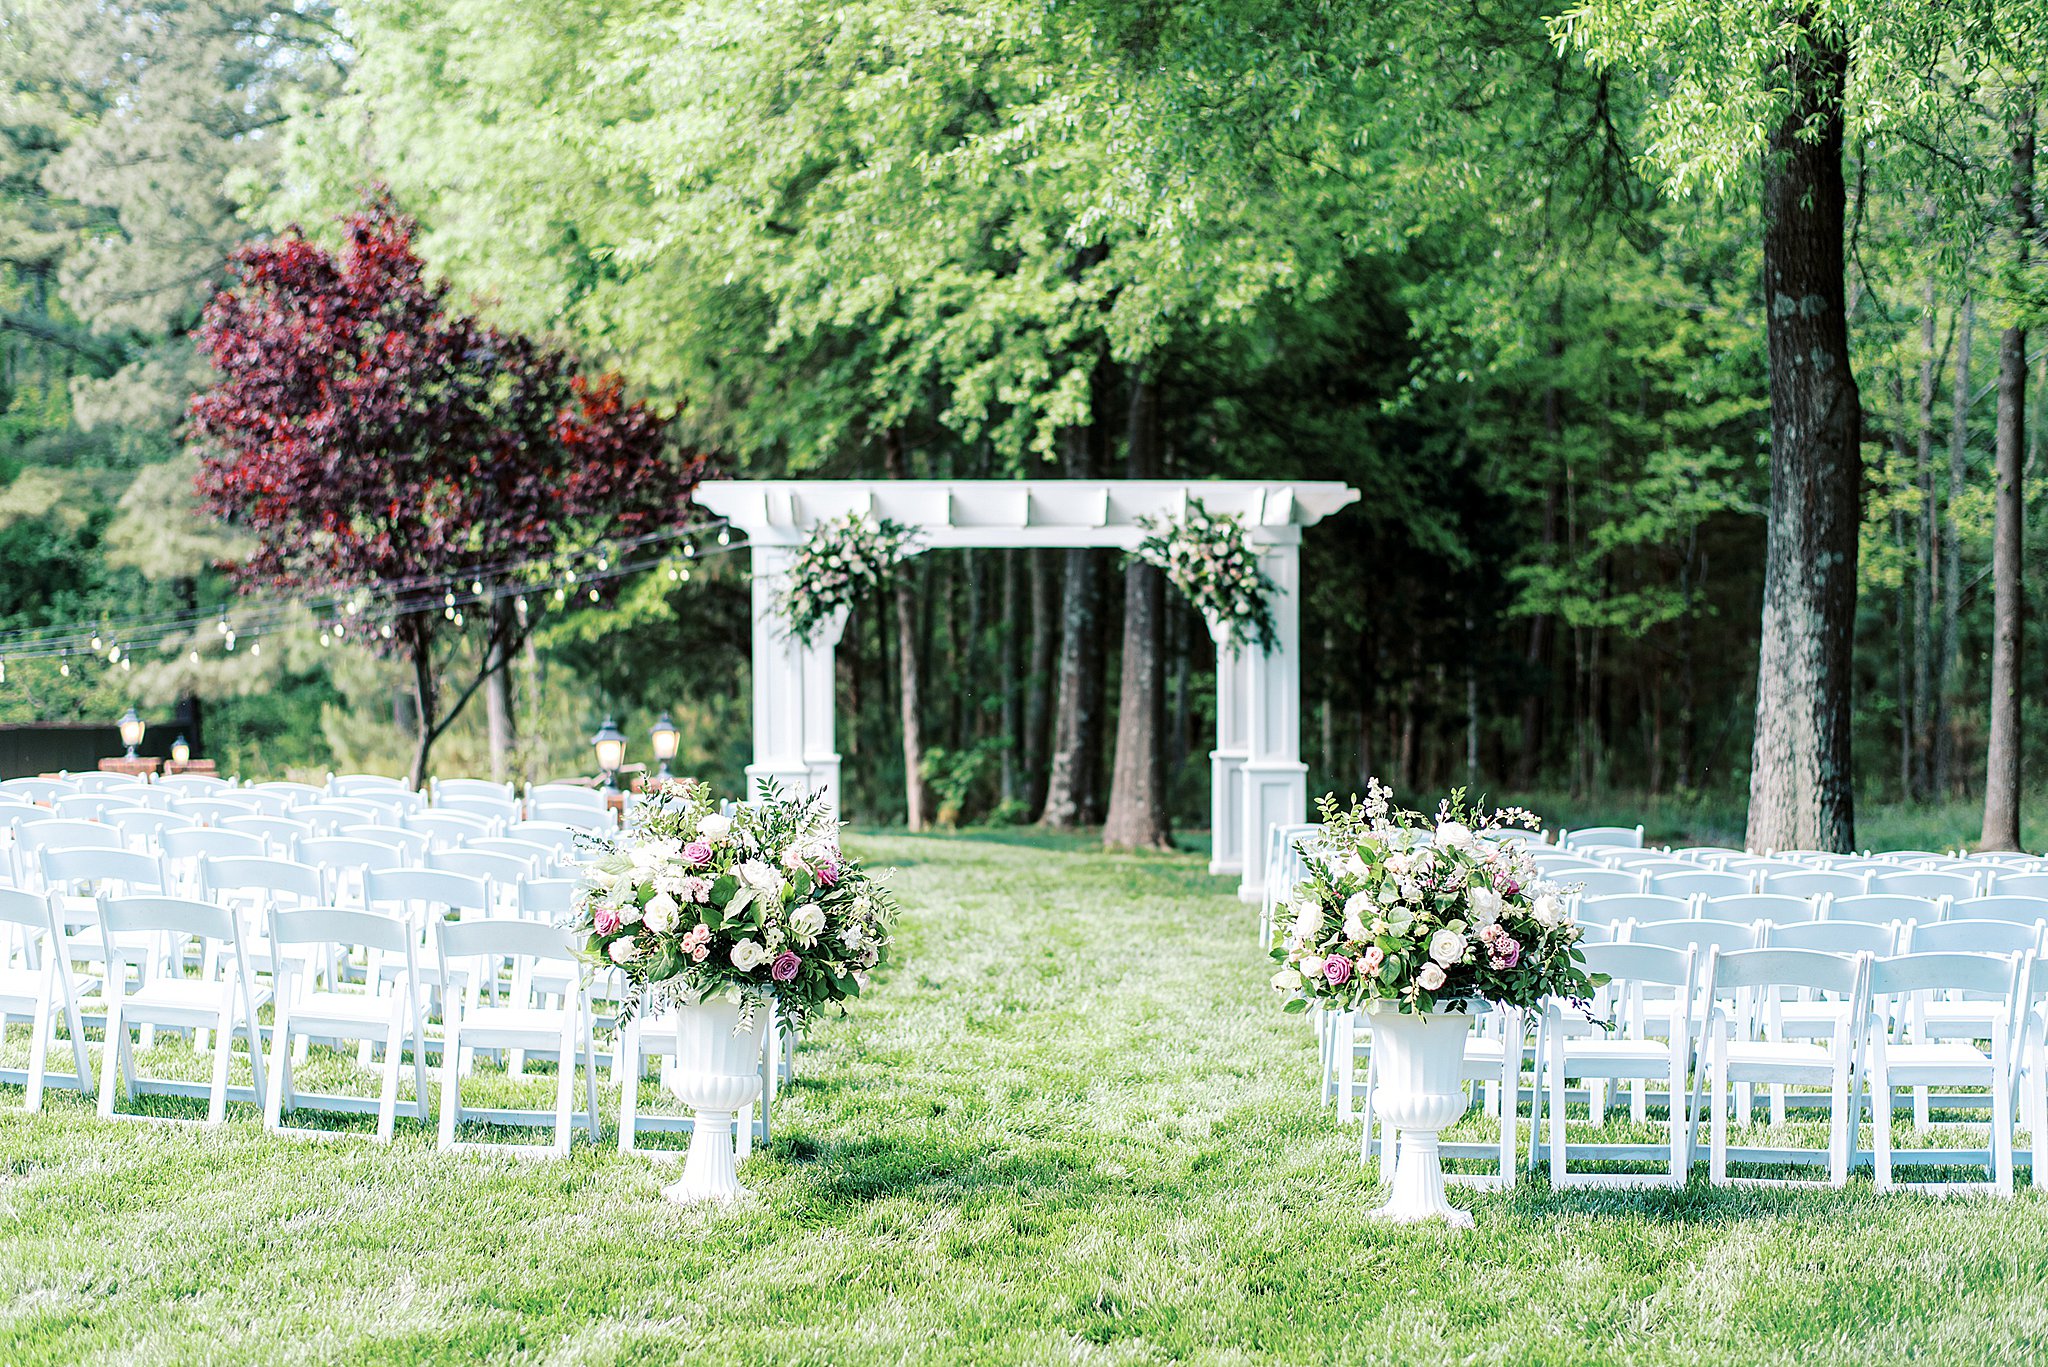 Details of a wedding ceremony setup in a grassy field